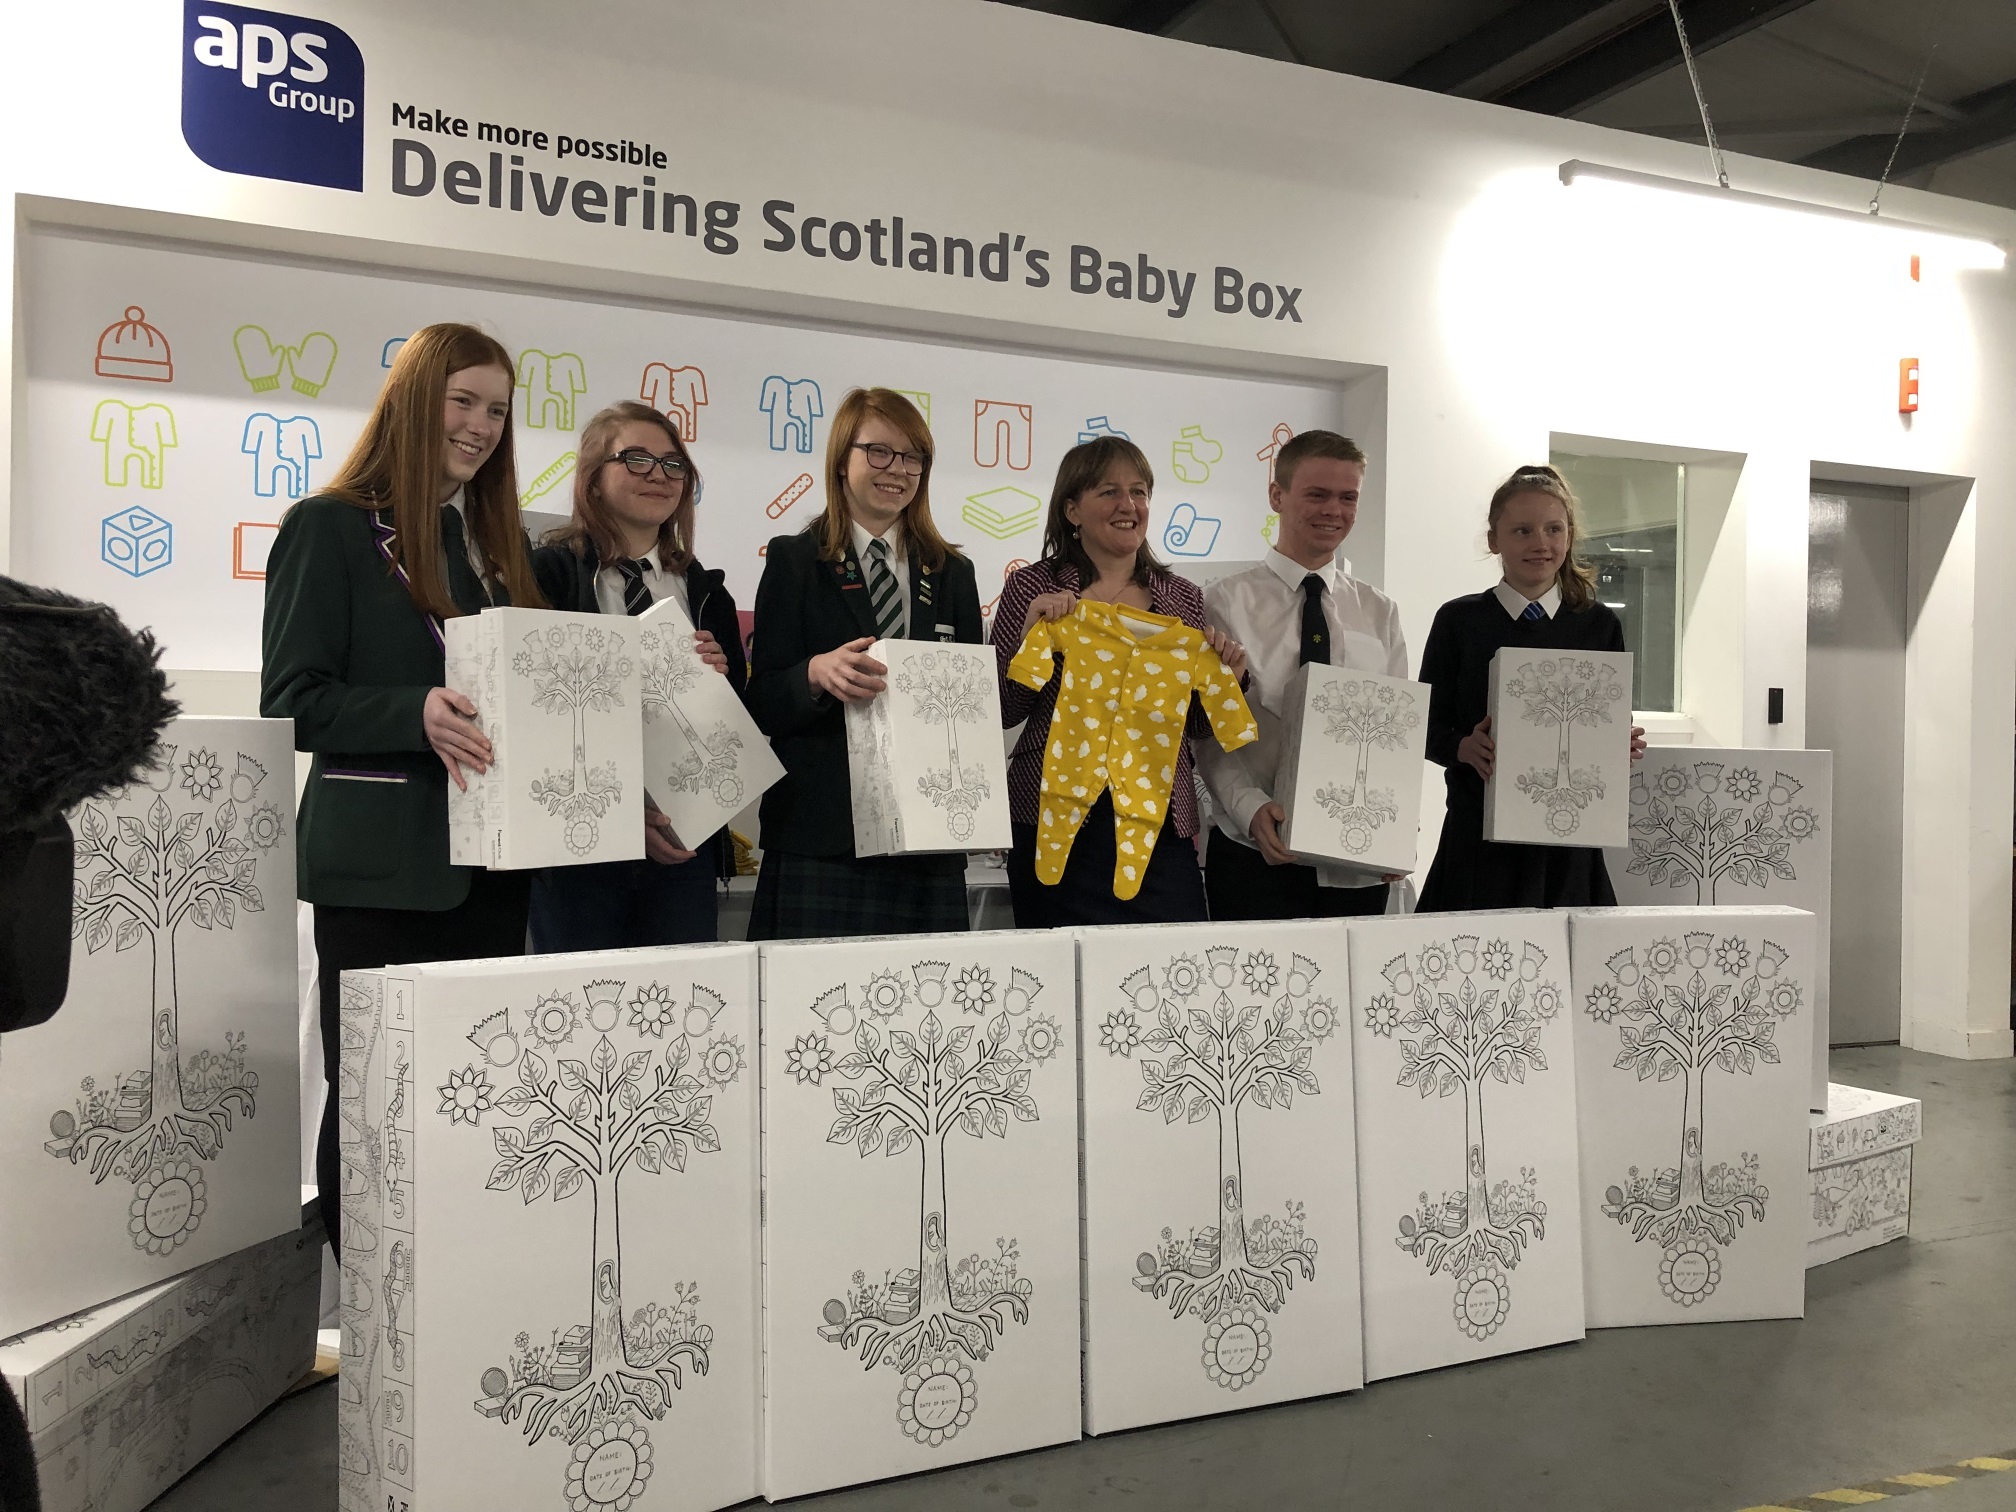 St Columba's pupils design features on Scotland's Baby Box